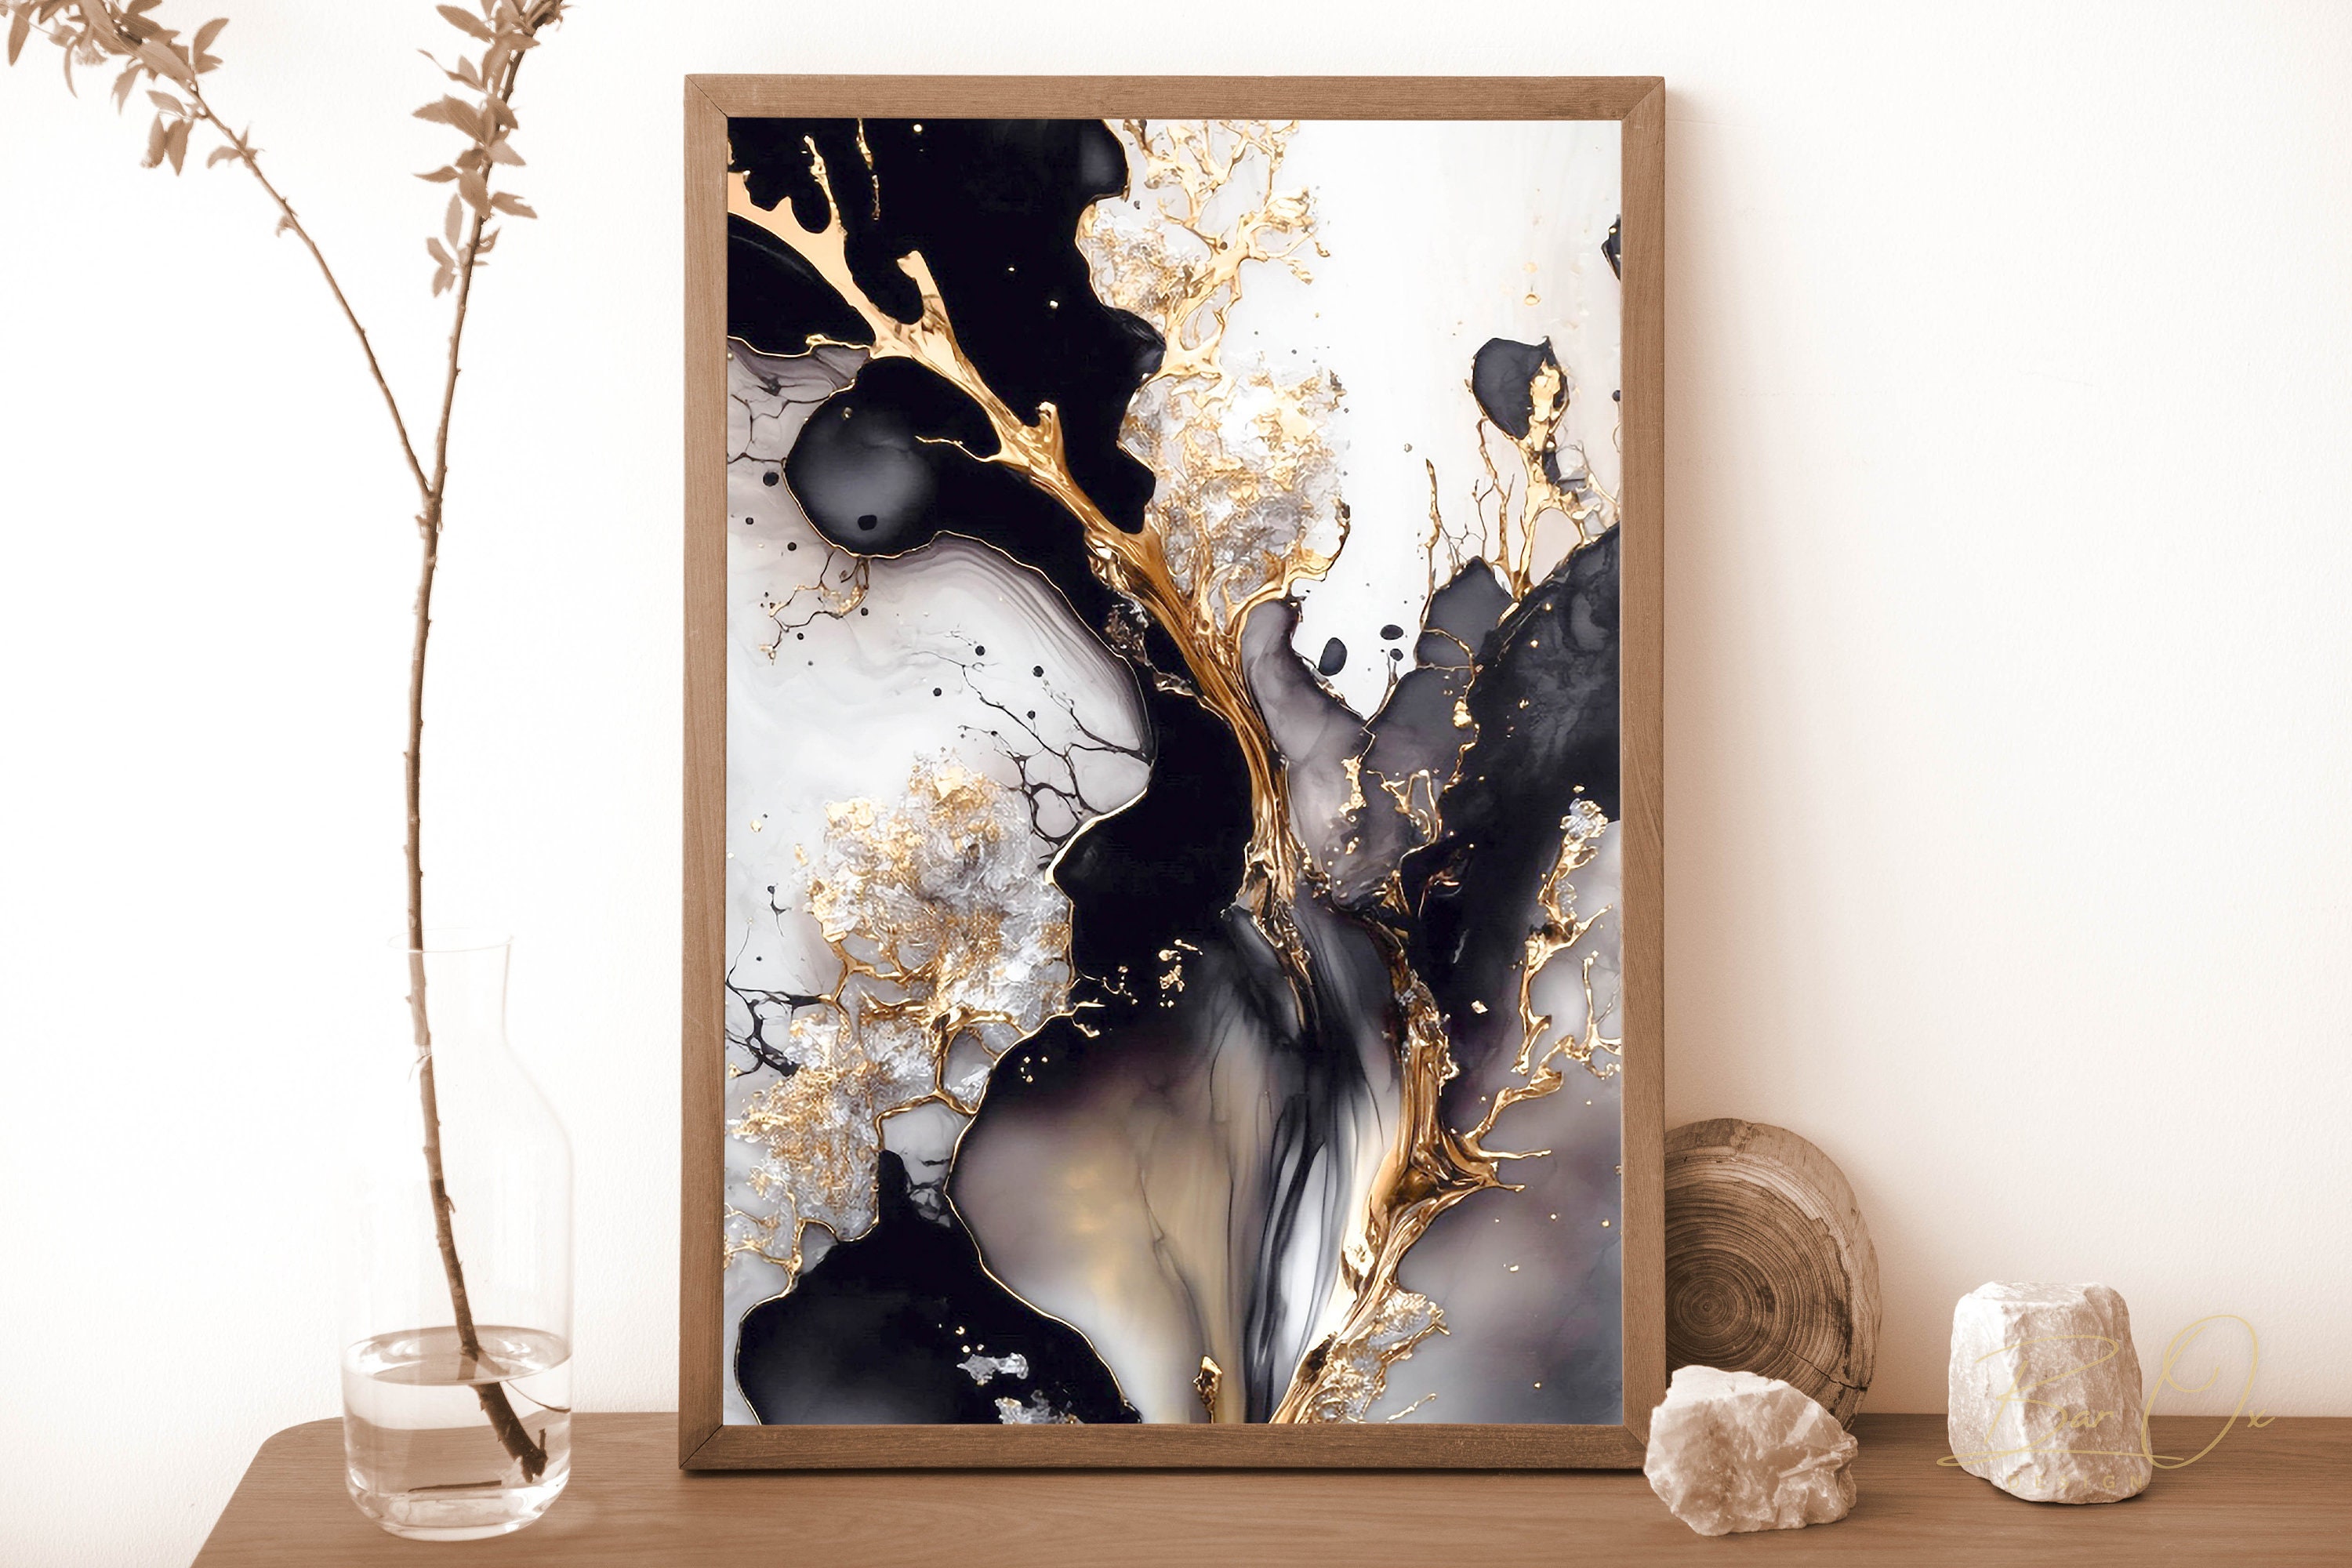 Black, White, and Gray Abstract: Original Alcohol Ink Painting Greeting  Card for Sale by herzart